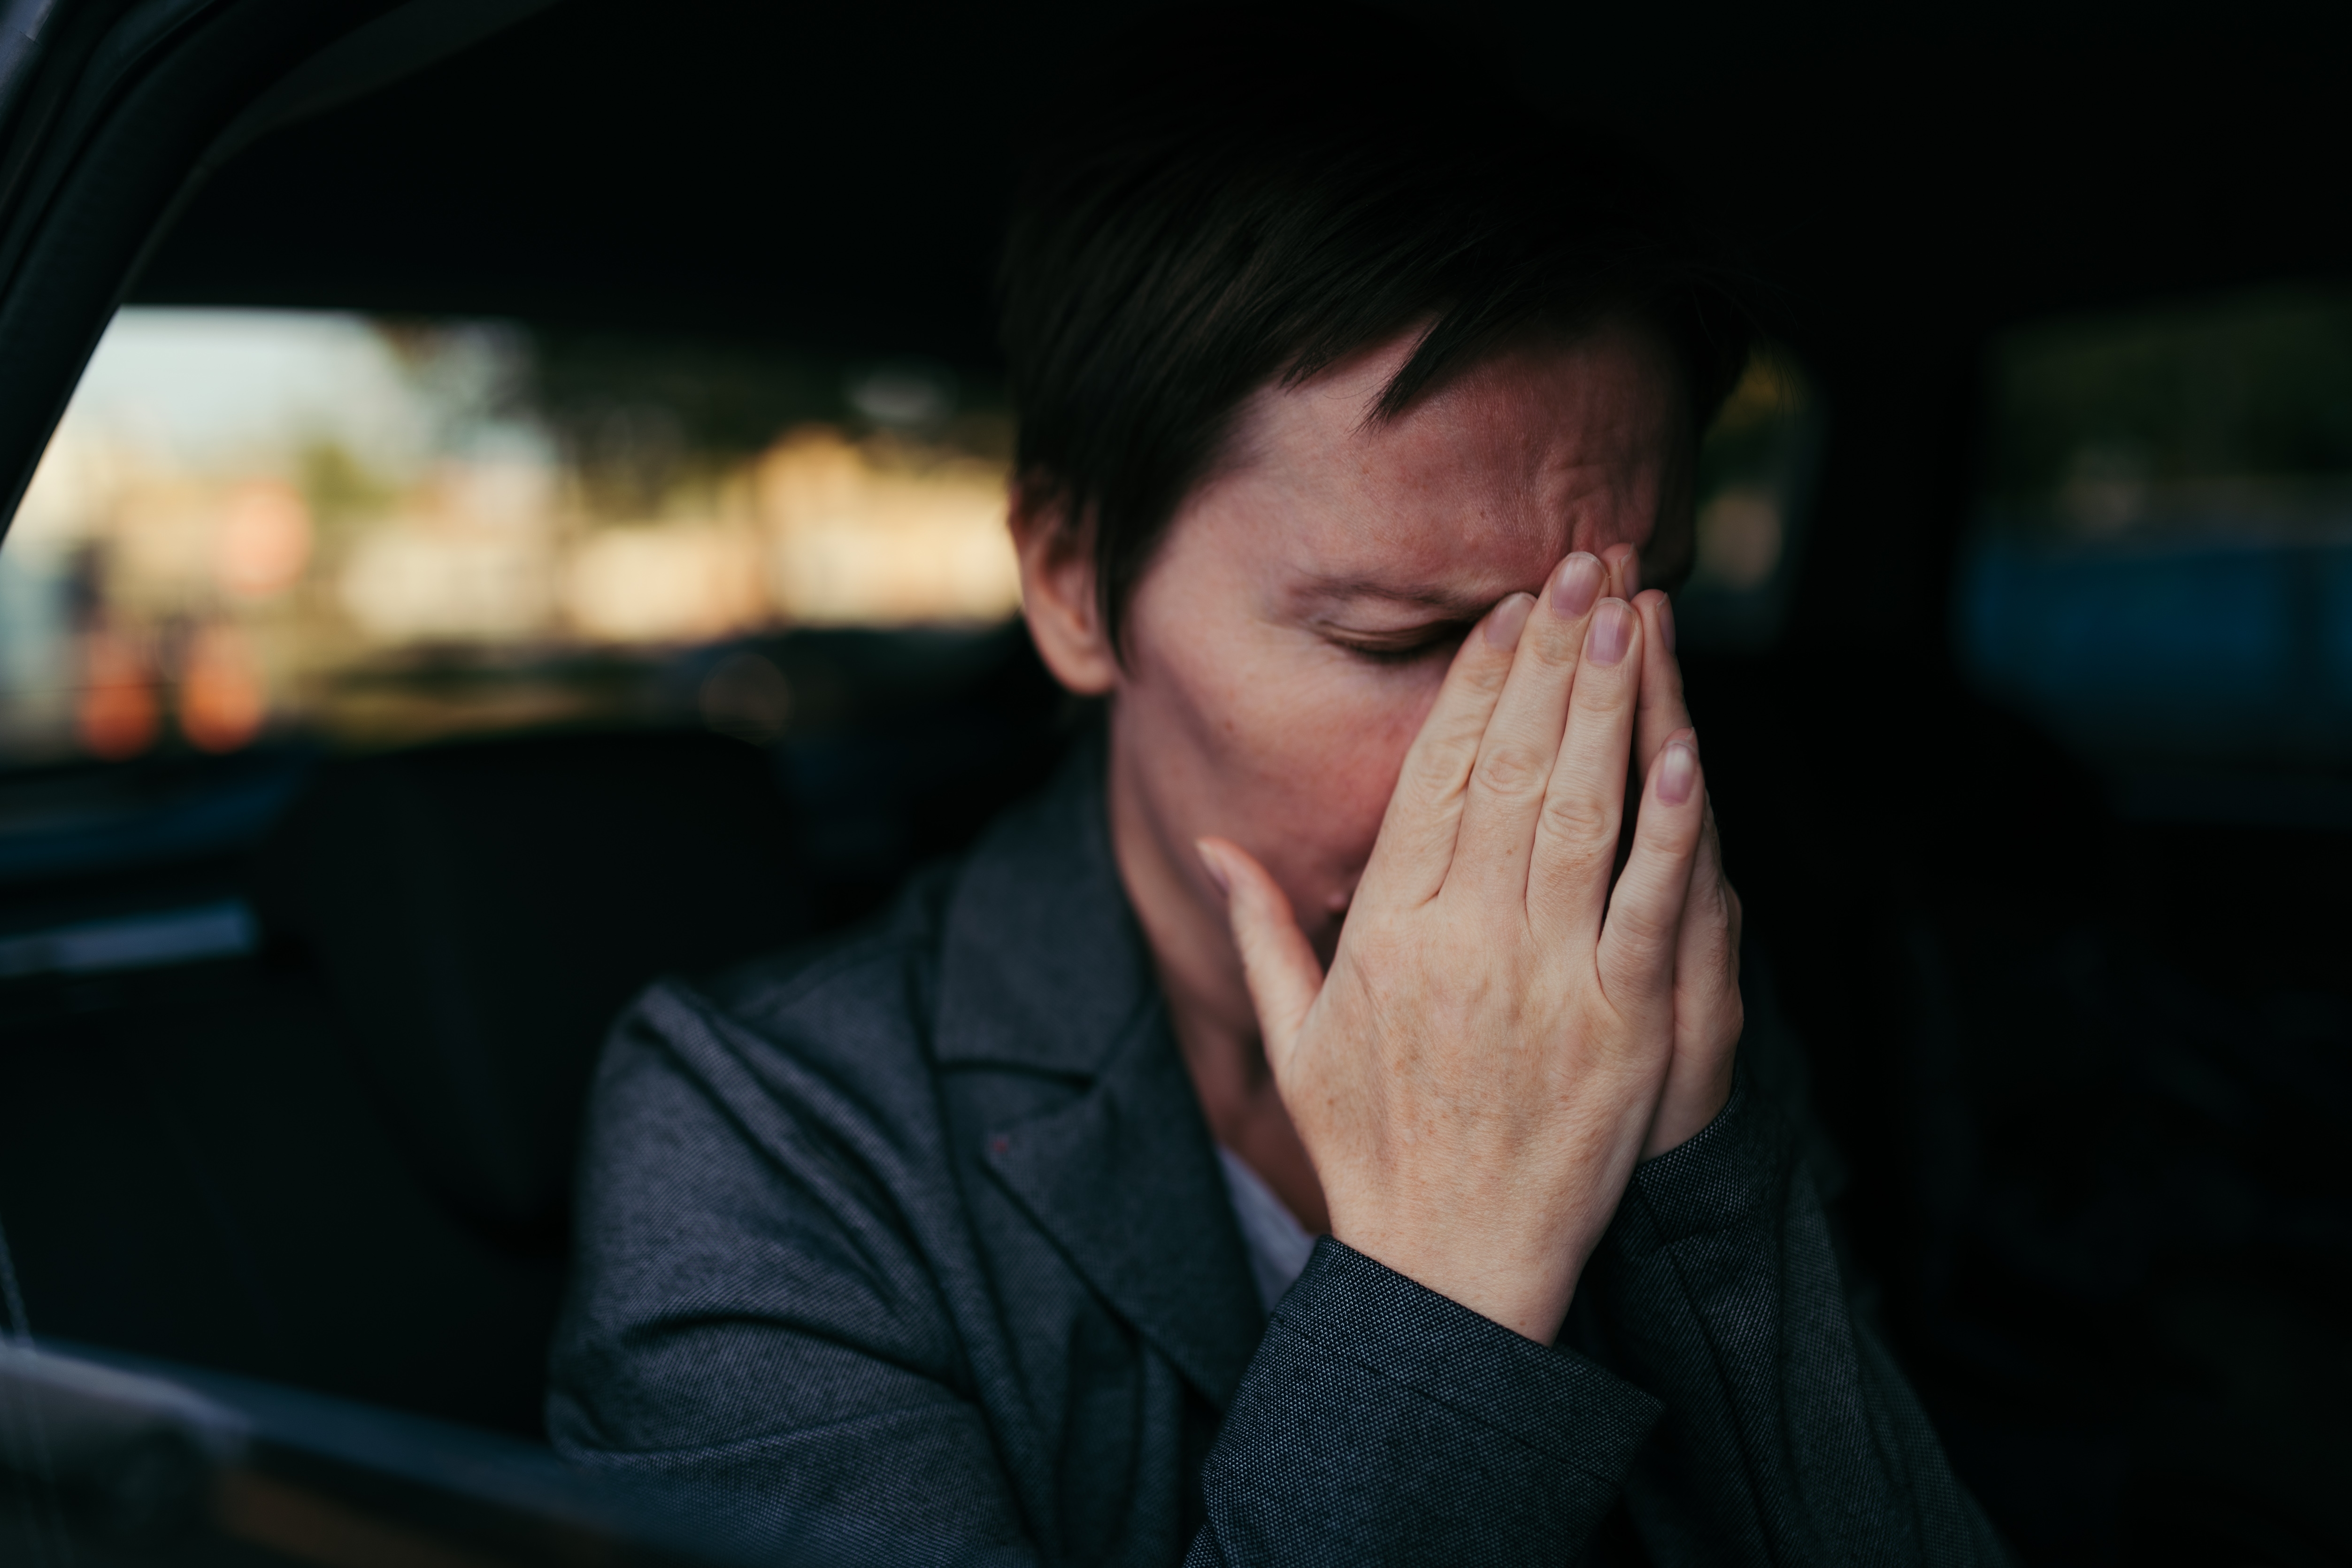 An anxious woman sitting in the back of a car | Source: Shutterstock